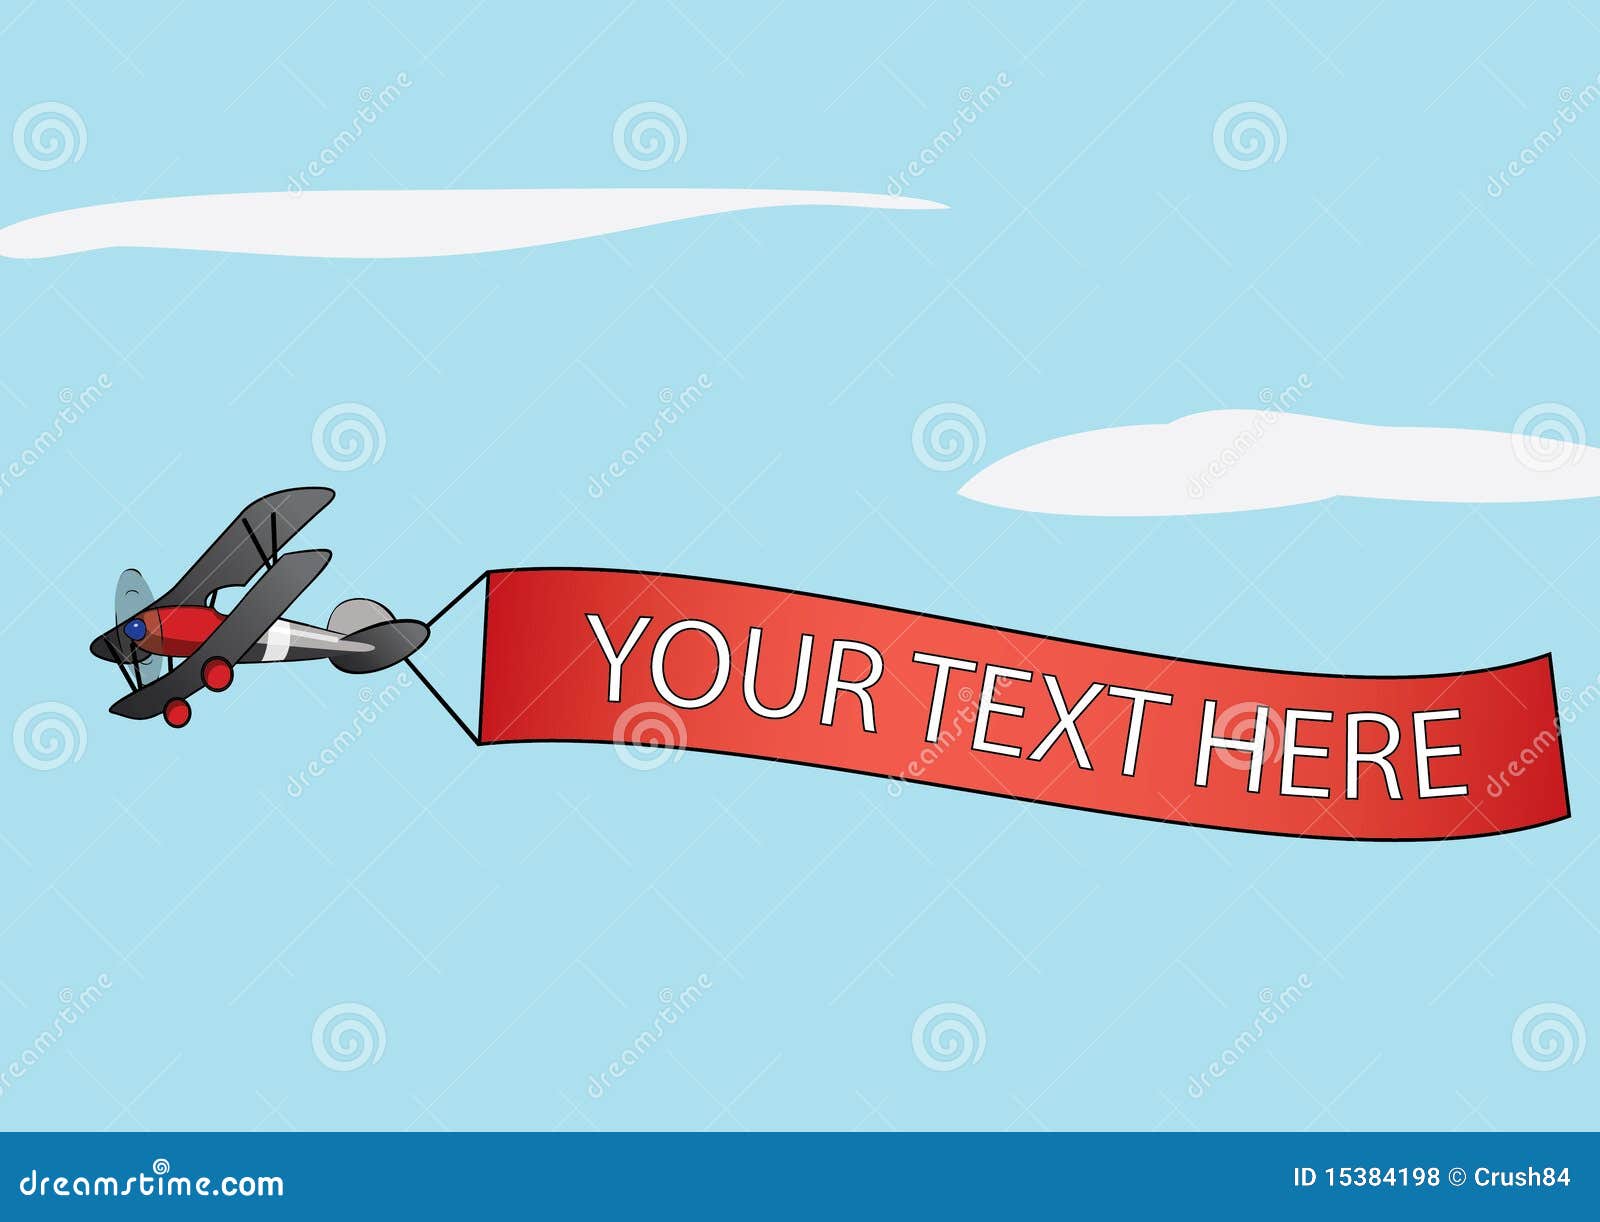 clipart airplane with banner - photo #43